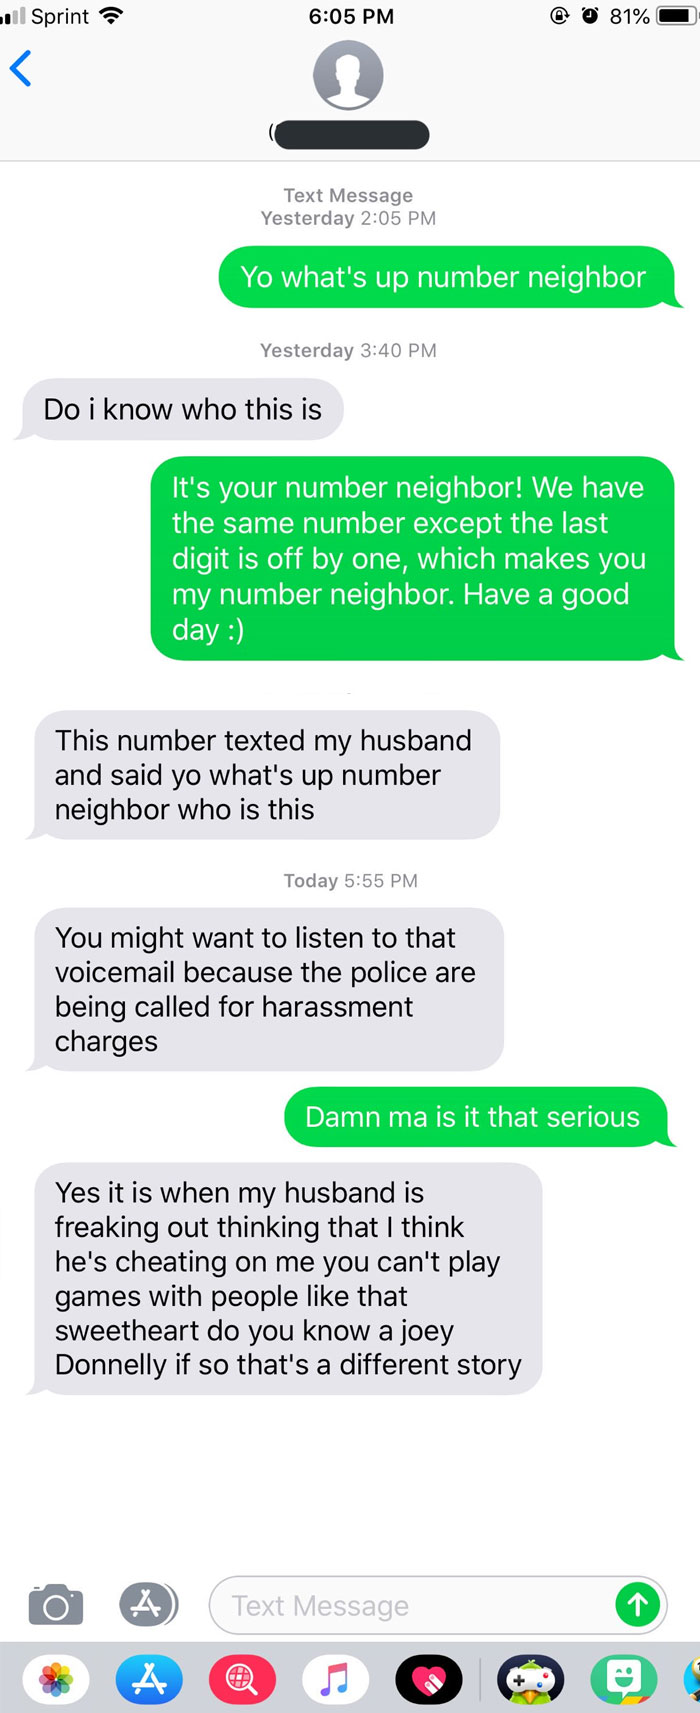 Yall My Number Neighbor Wont Stop Calling Me And Now His Wife Is Threatening Charges Lmaoooo